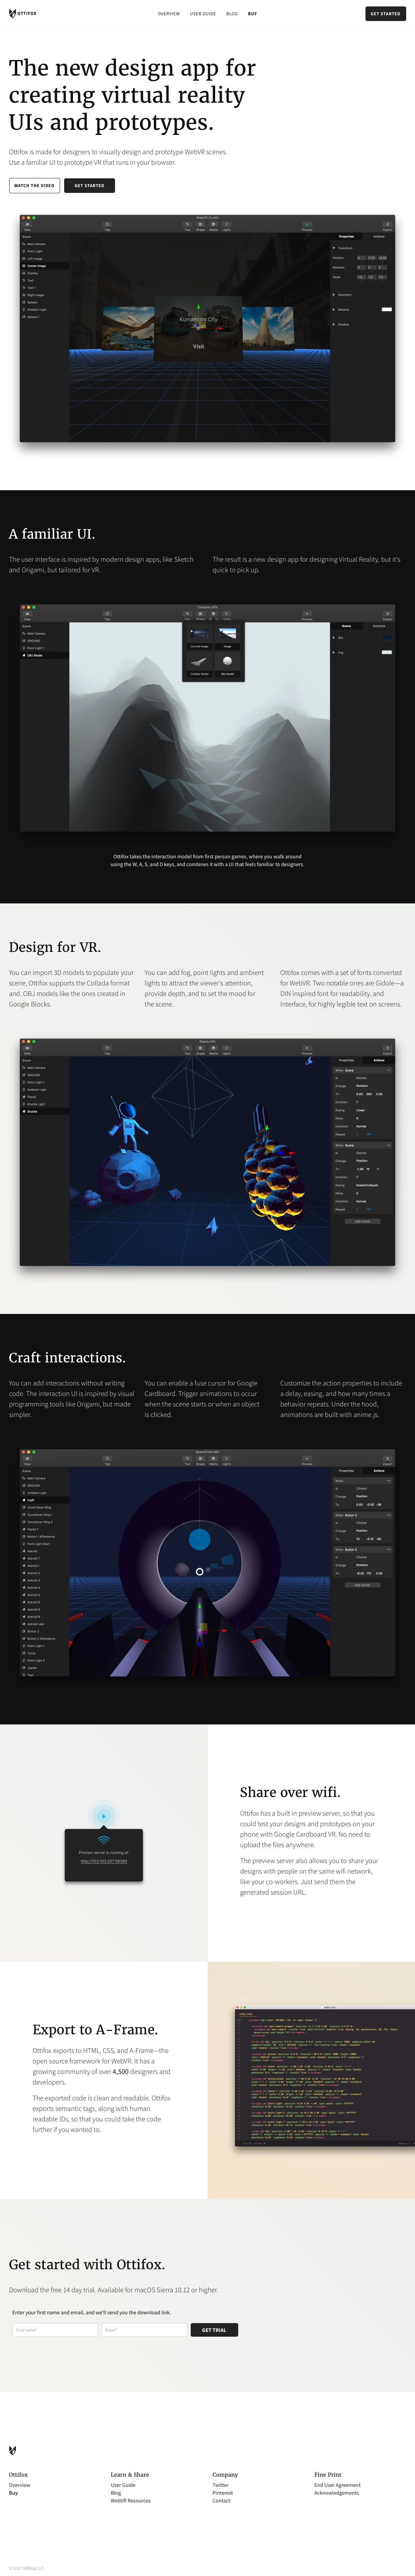 Ottifox Landing Page Example: Ottifox is made for designers to visually design and prototype WebVR scenes.